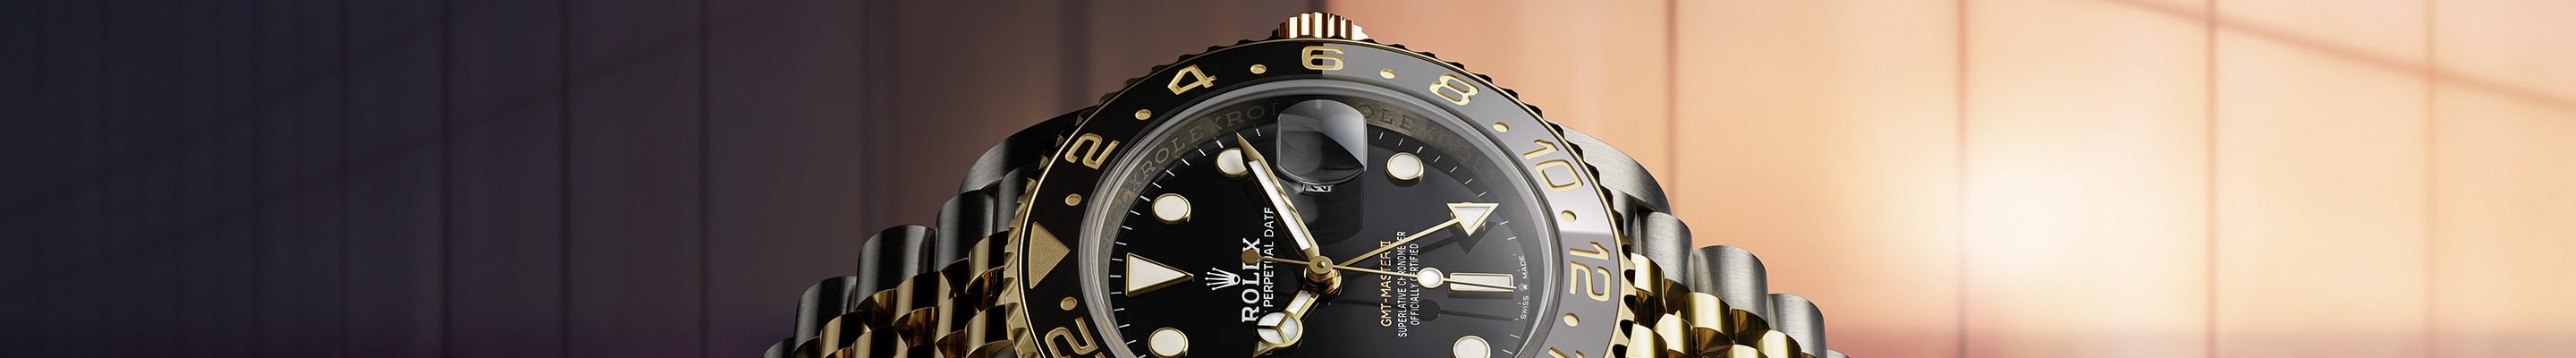 GMT-Master II Oyster, 40 mm, Oystersteel and yellow gold - M126713GRNR-0001 at Boutellier Montres